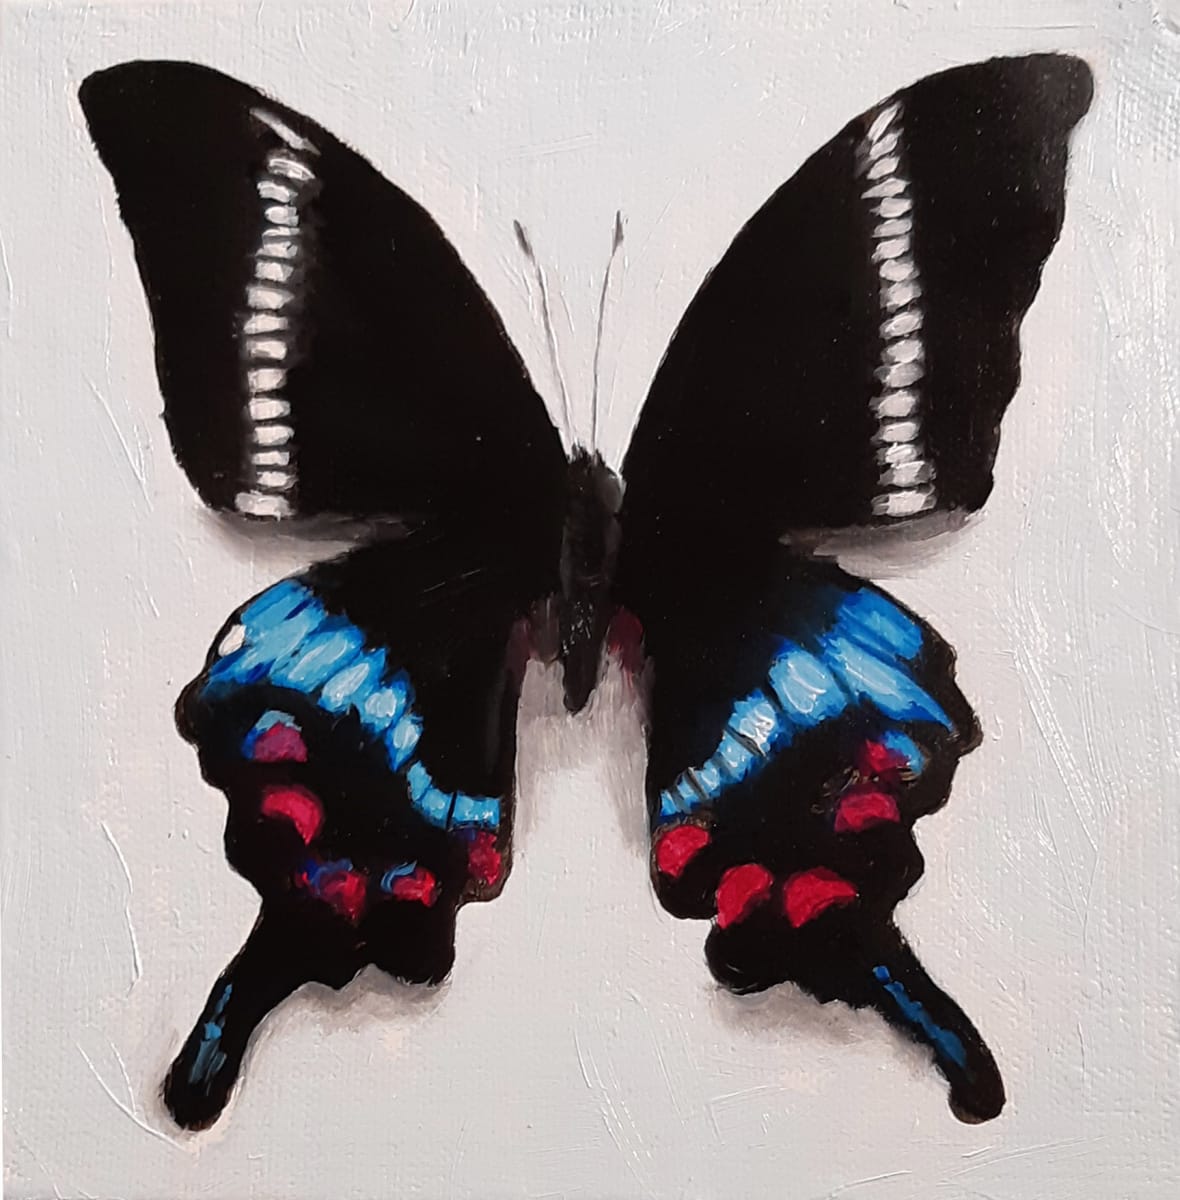 Small Gloss Swallowtail by Catherine Mills  Image: Small Gloss Swallowtail, 6 x 6 inches, Oil on gallery wood panel